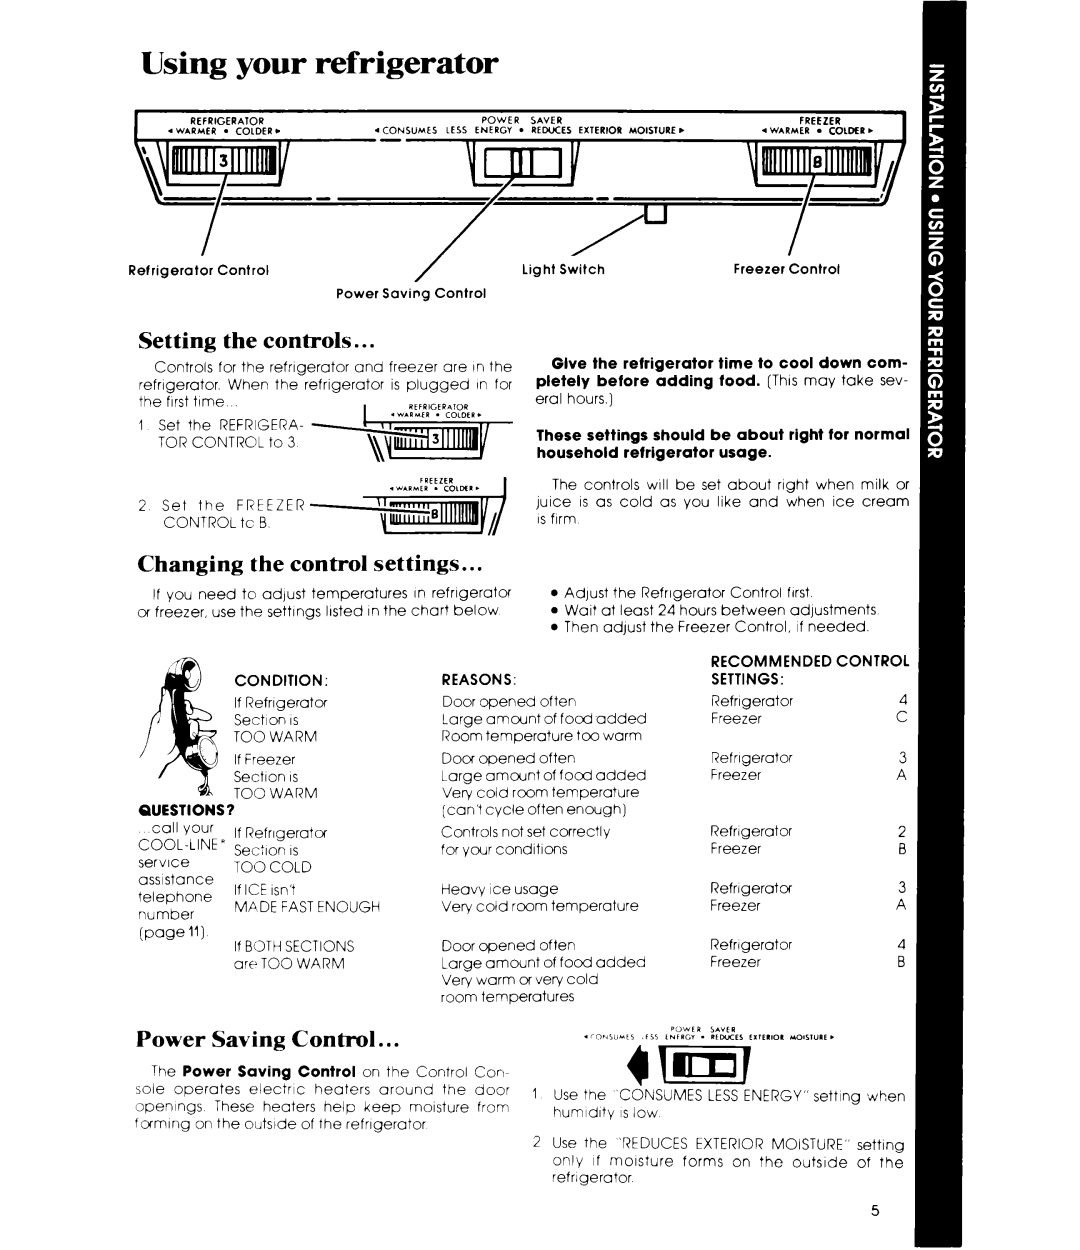 Whirlpool ET14AK manual Using your refrigerator, Setting the controls, Changing the control settings, Power Saving Control 